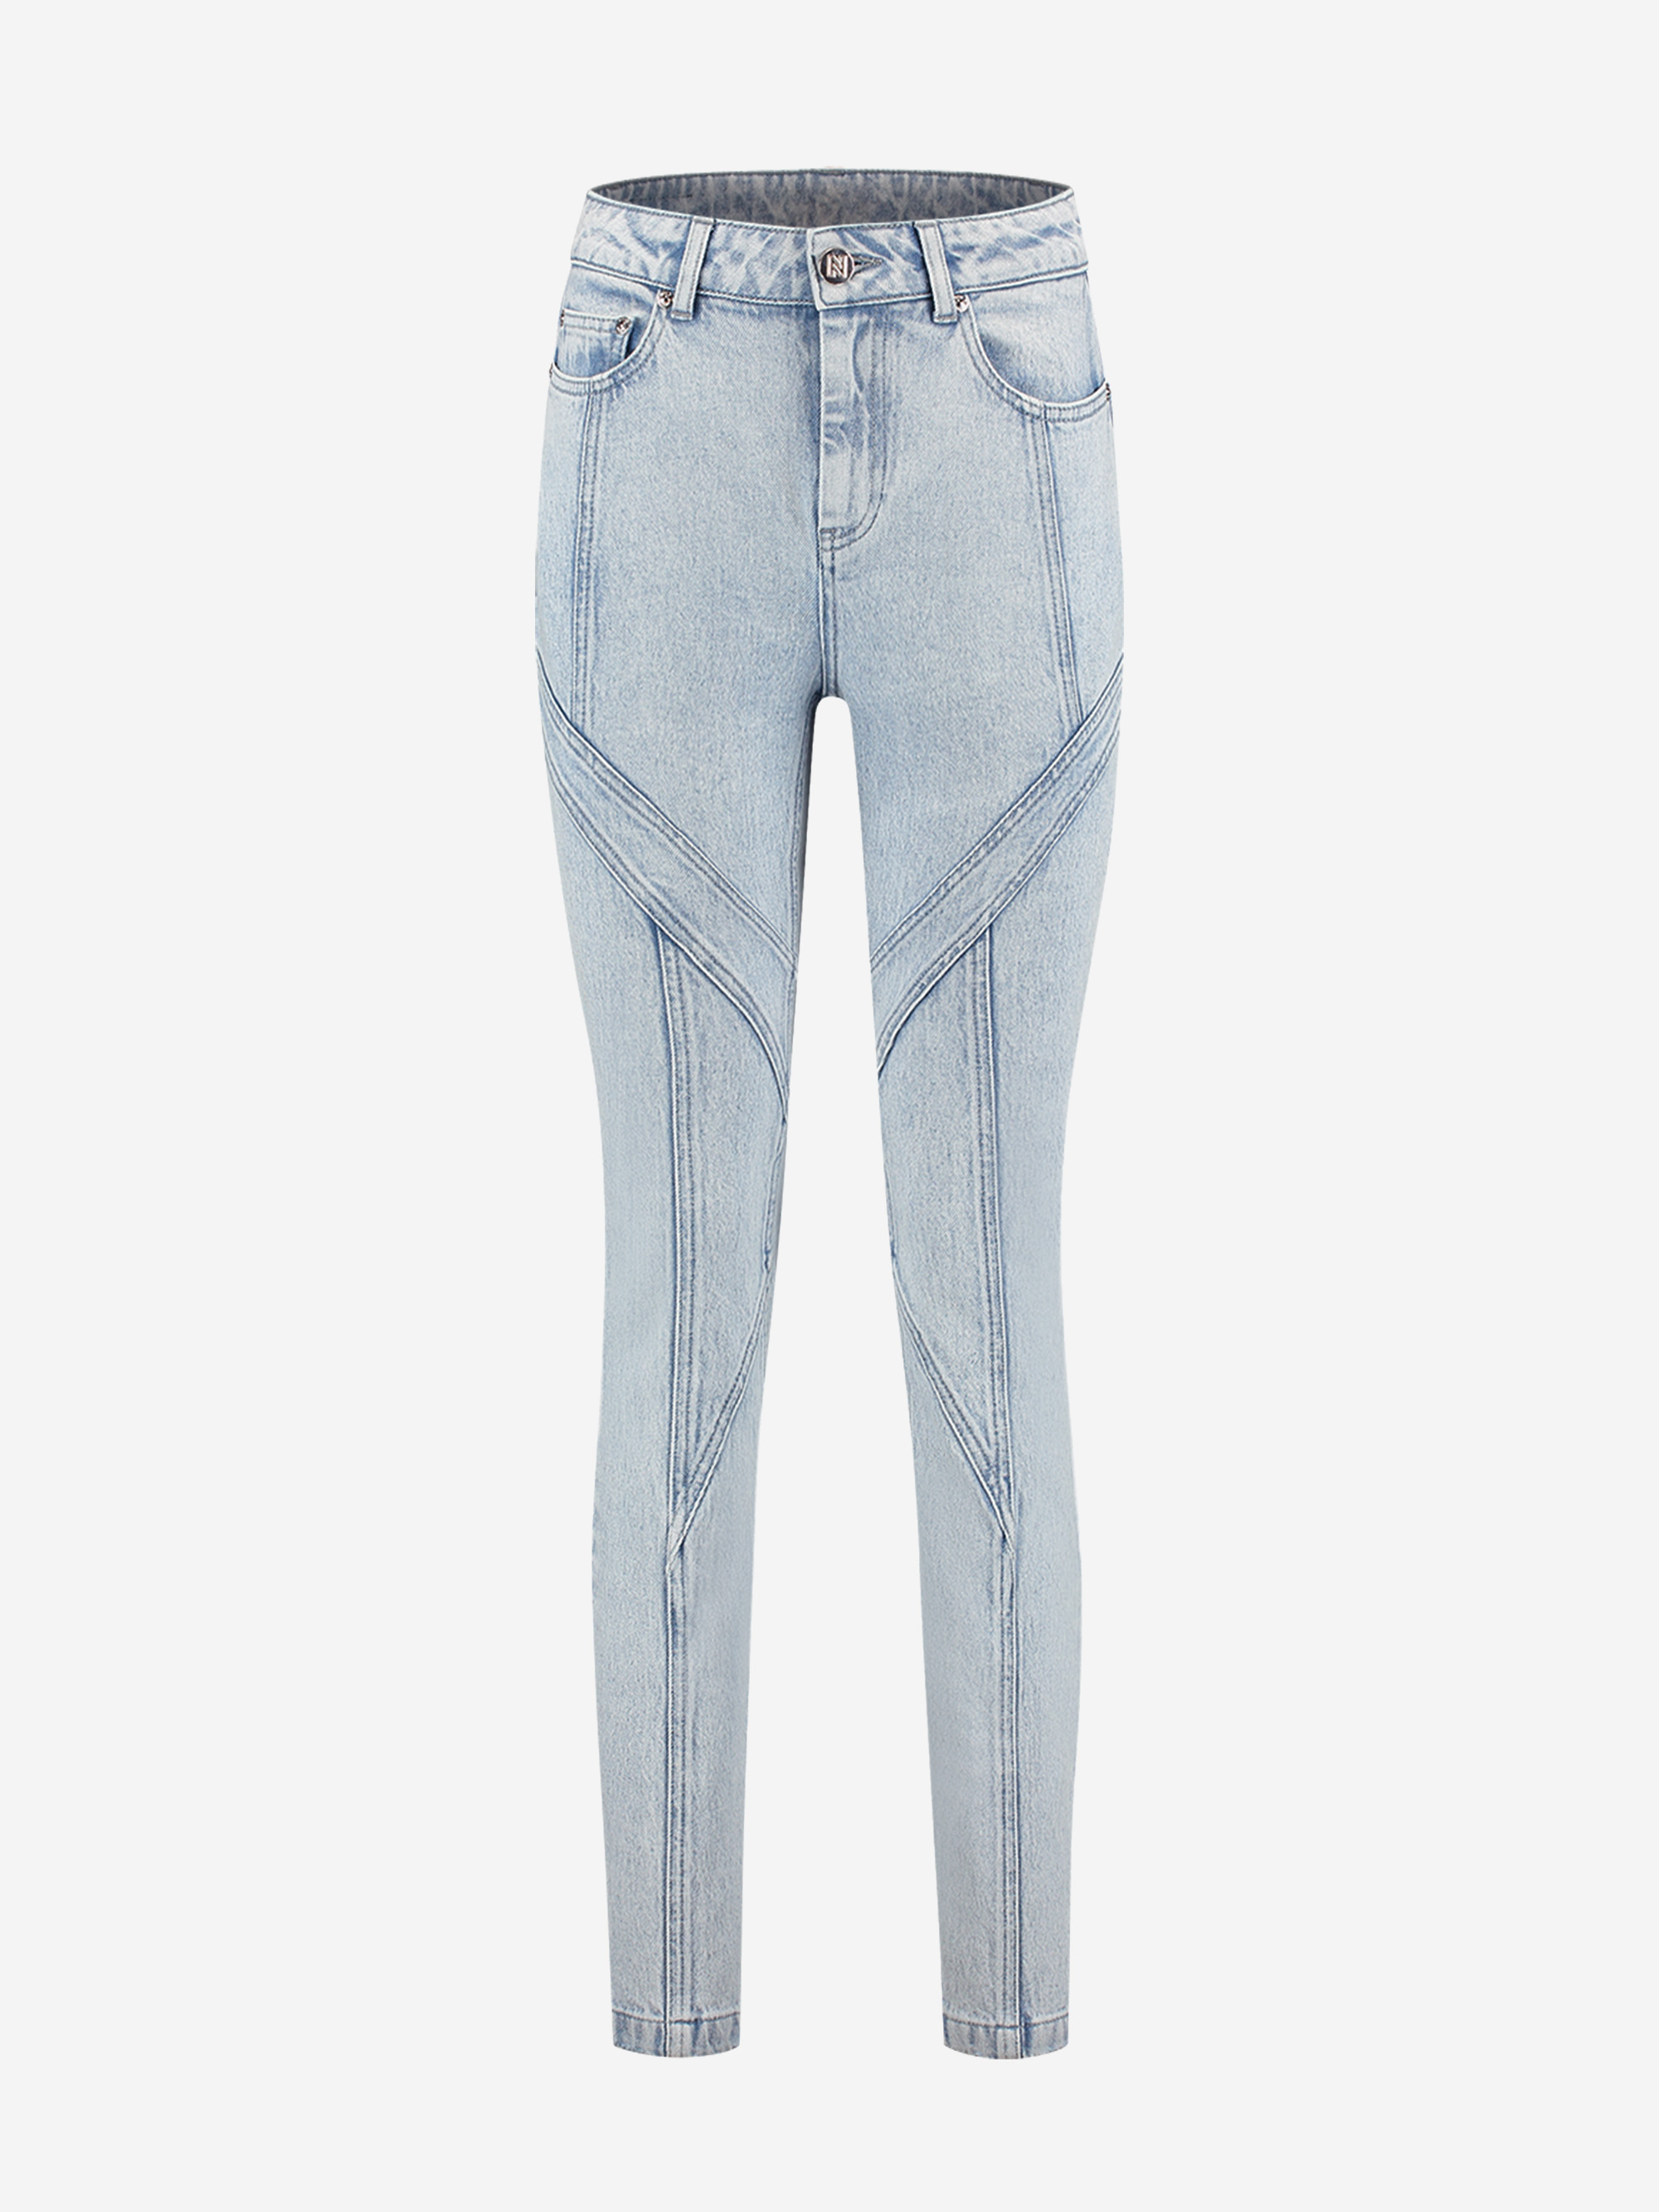 Jeans with line details